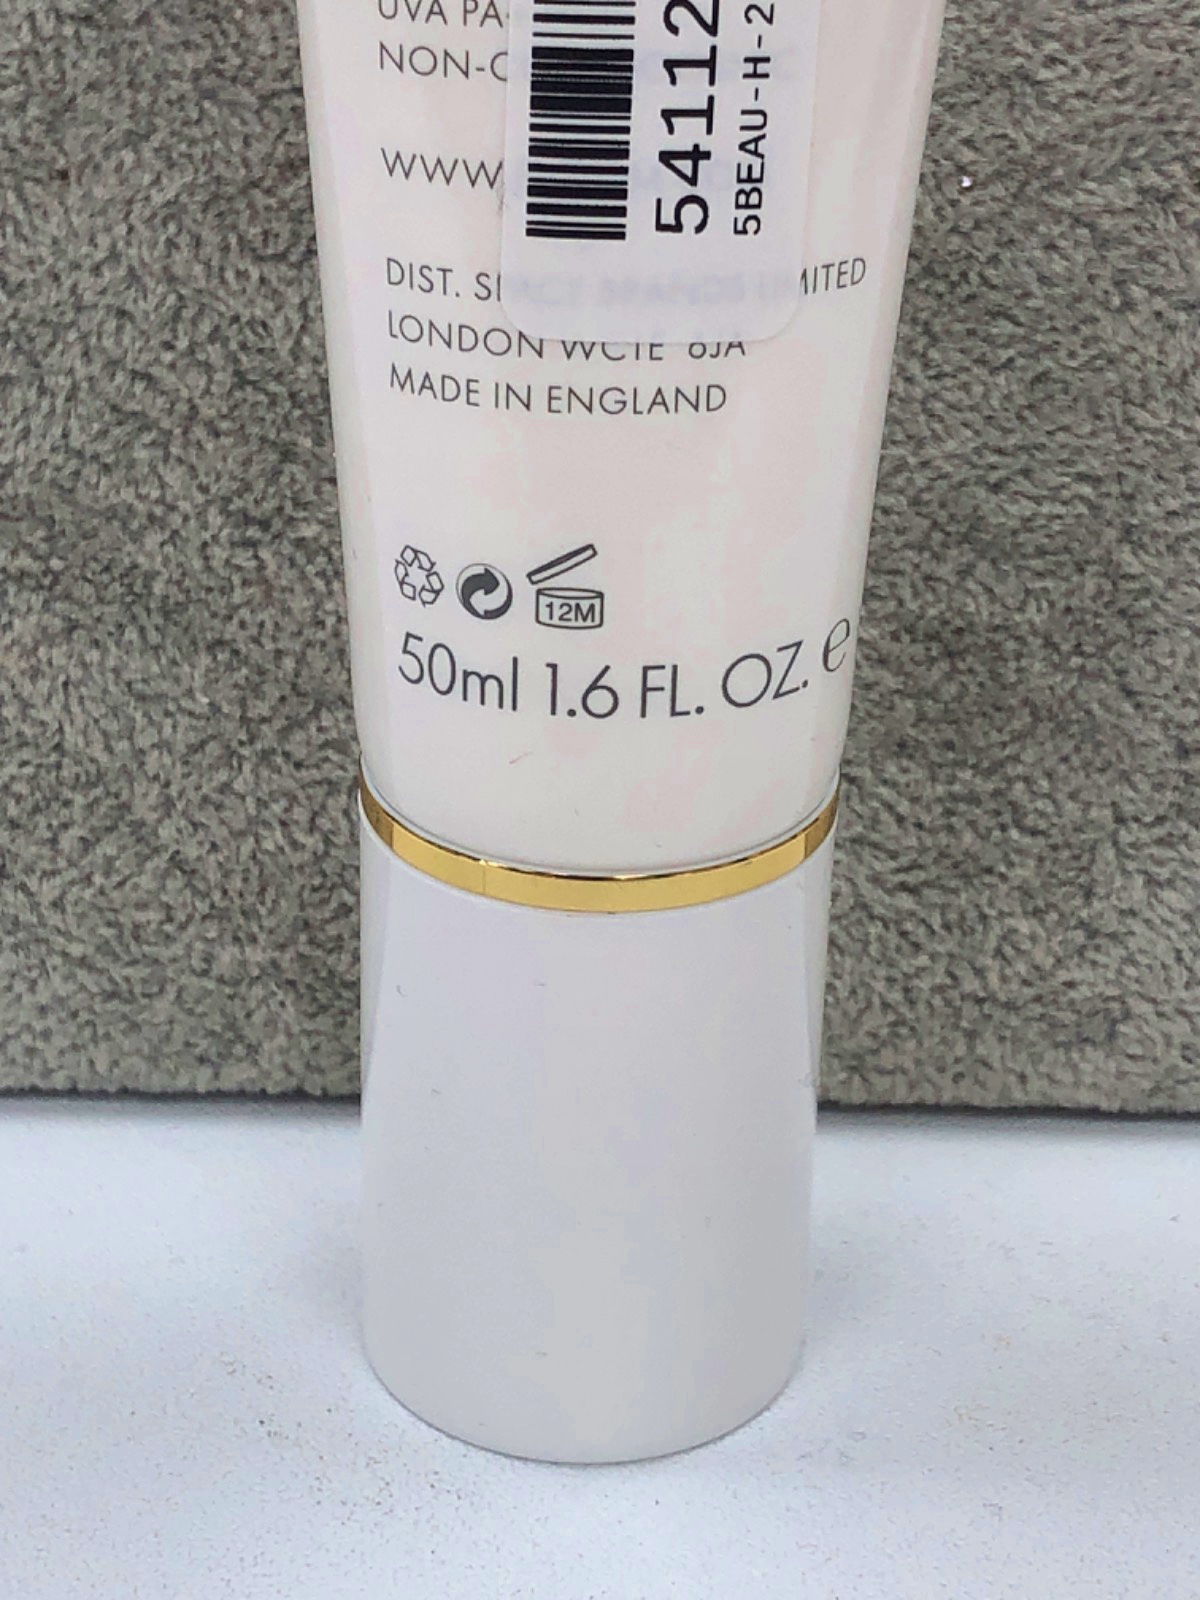 Eve Lom Daily Protection + SPF 50 50ml